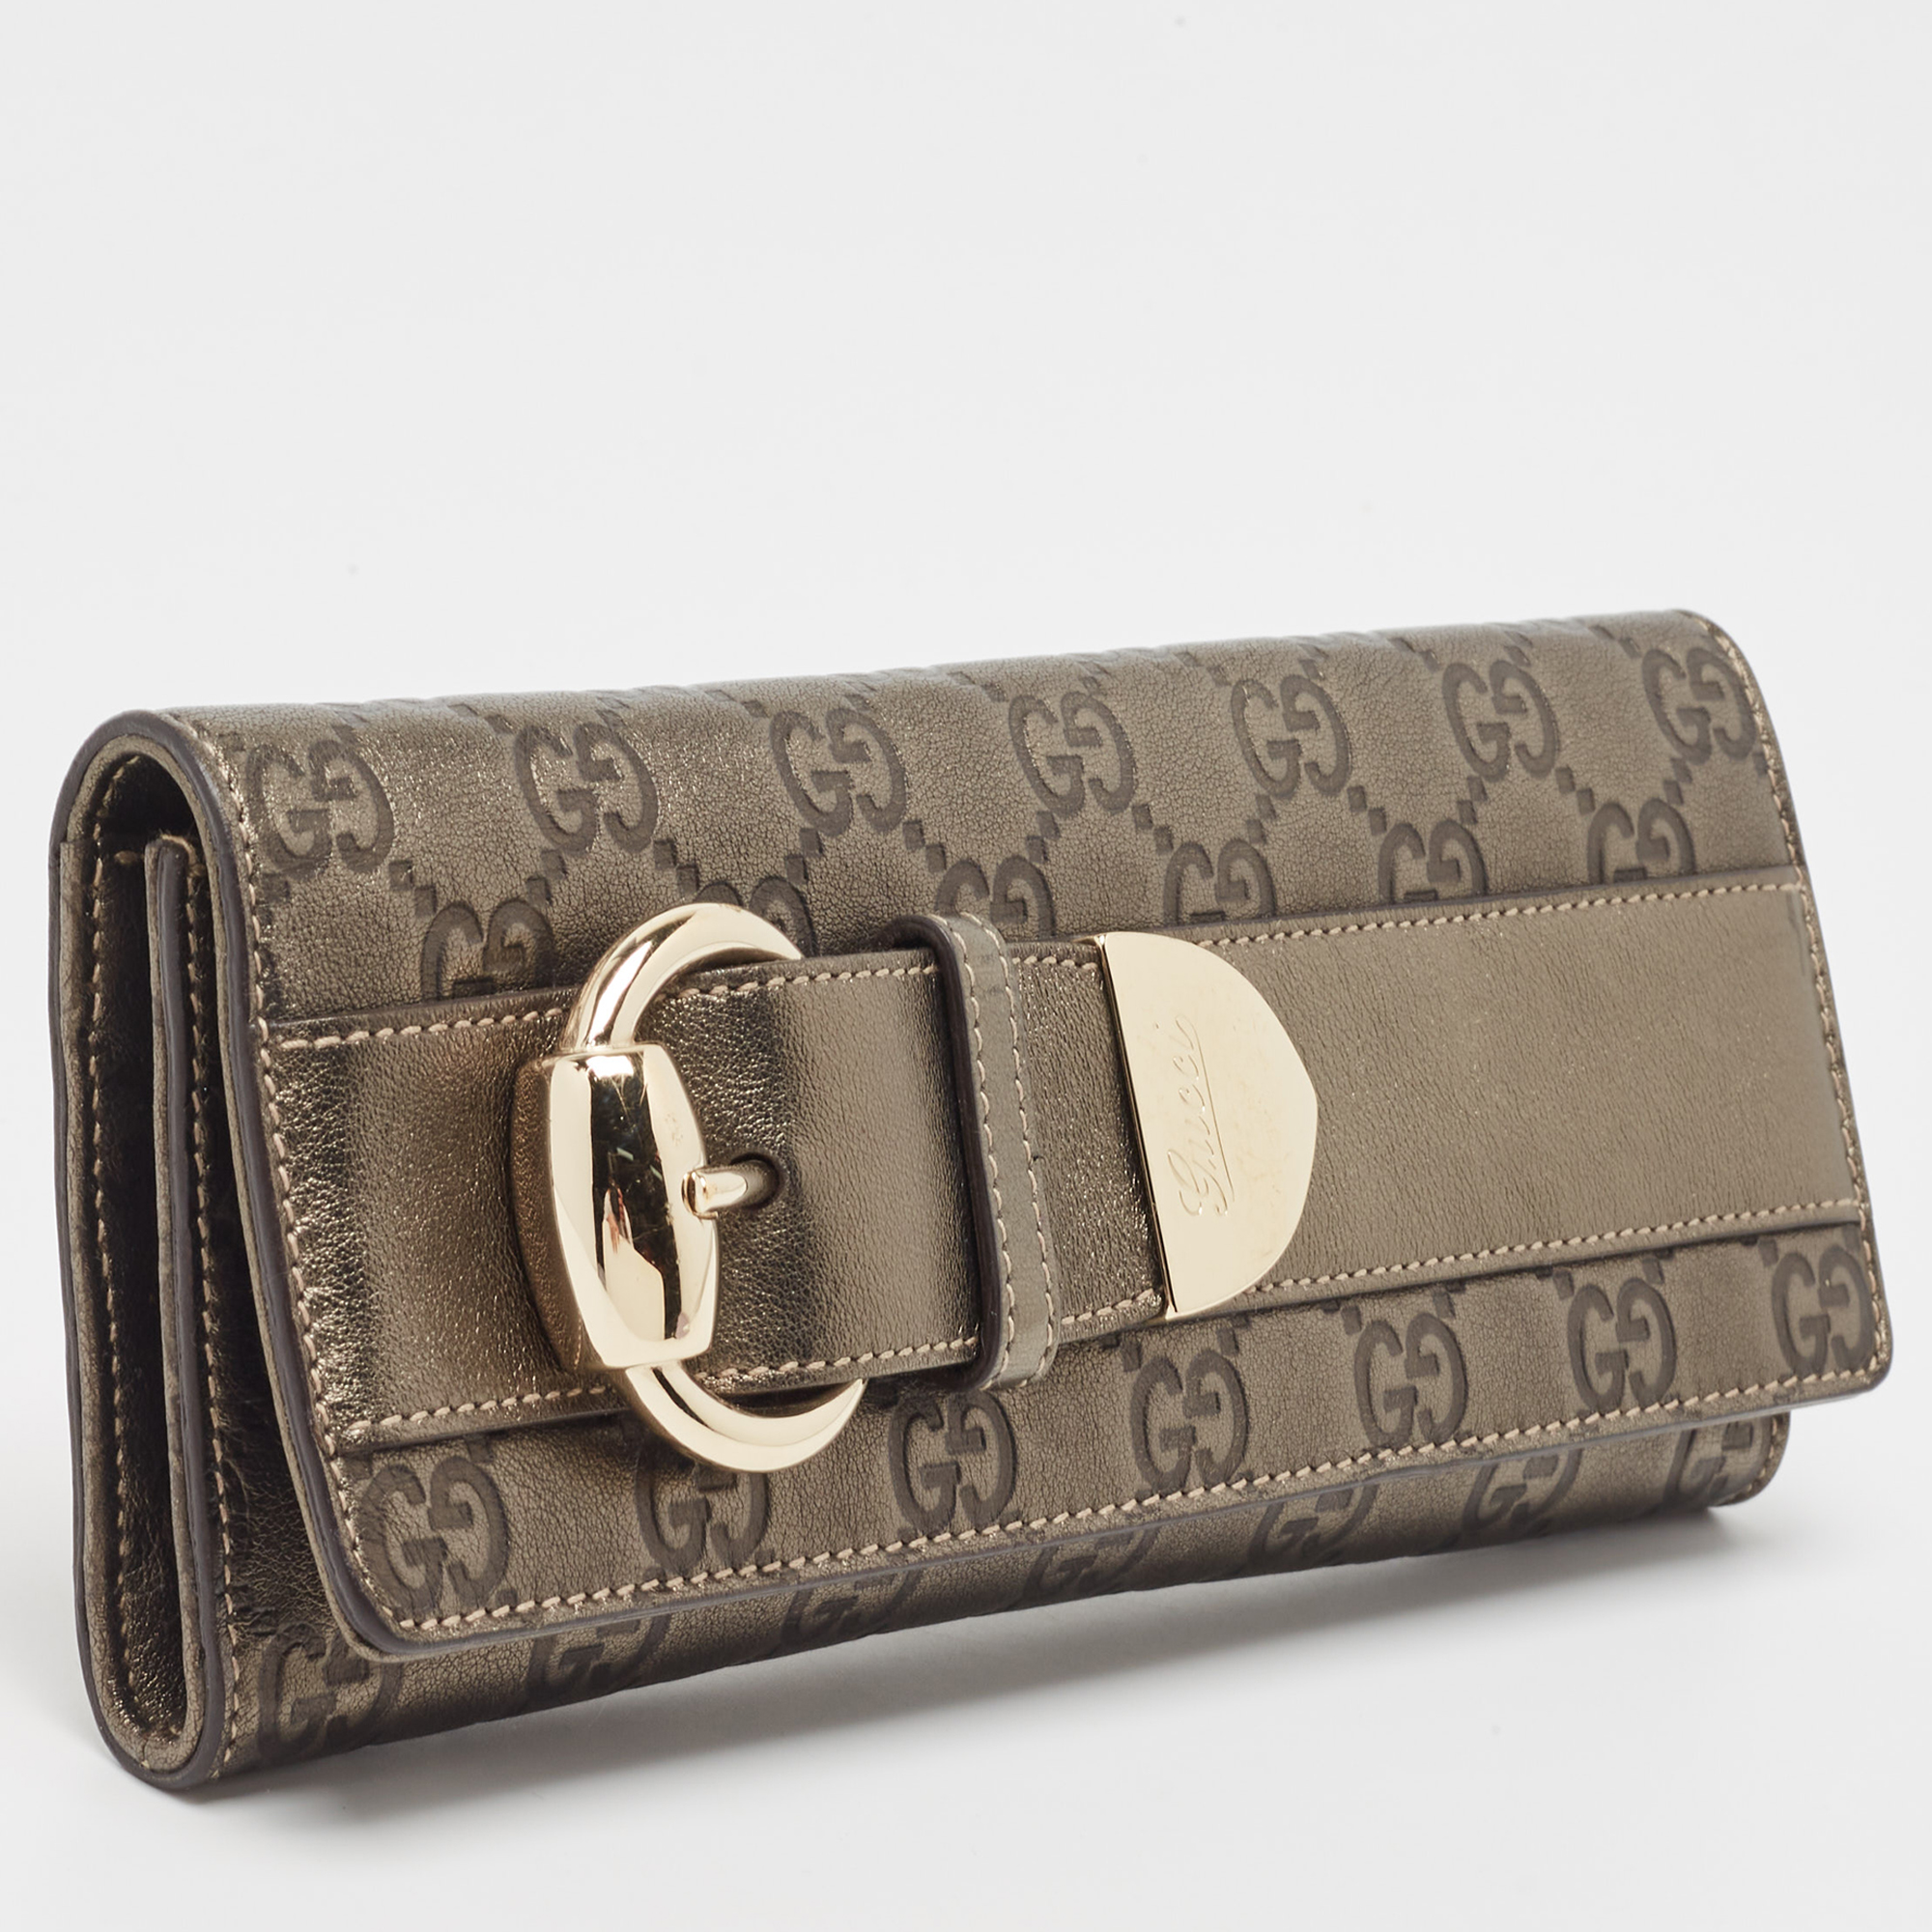 Gucci Metallic Guccissima Leather Buckle Continental Wallet